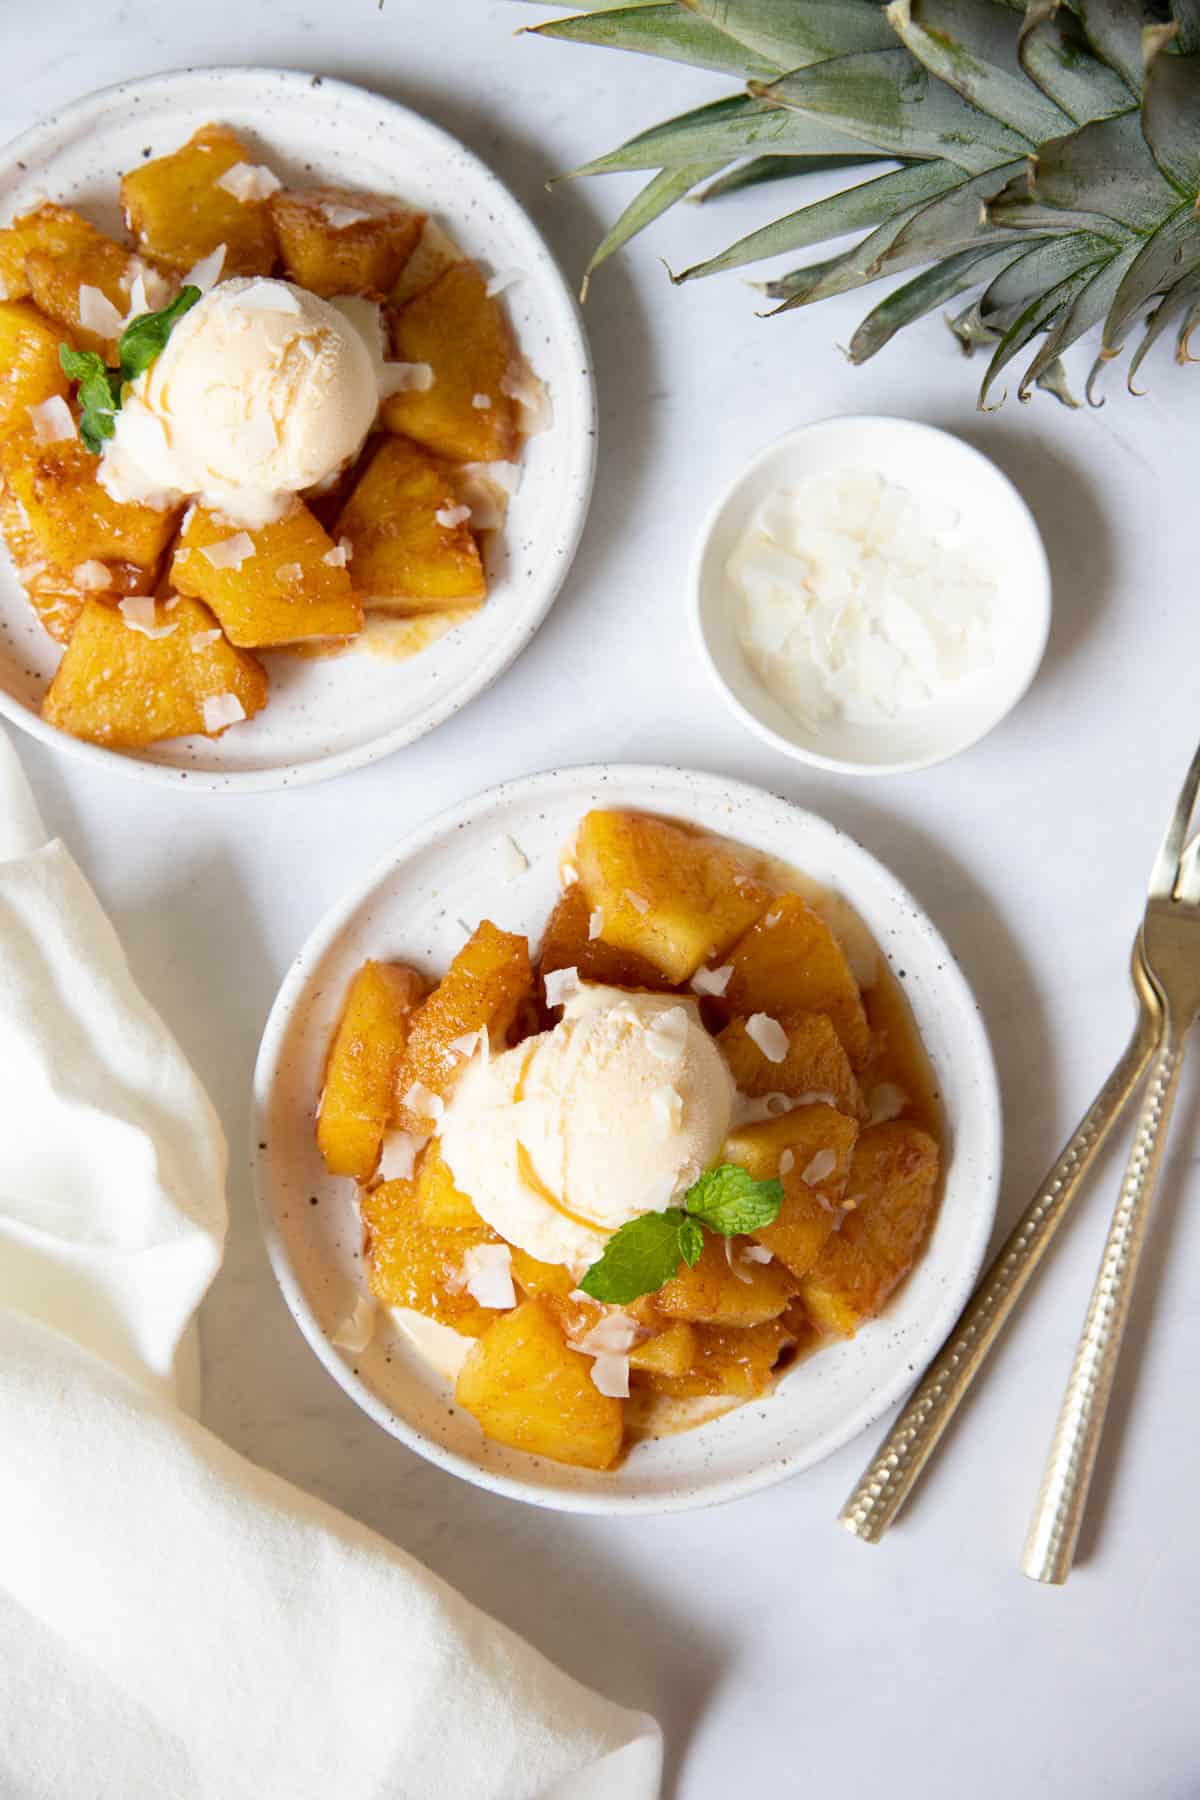 Two plates with fried pineapple and a scoop of vanilla ice cream plus coconut flakes. Forks sit to the side of the plates with a white napkin.